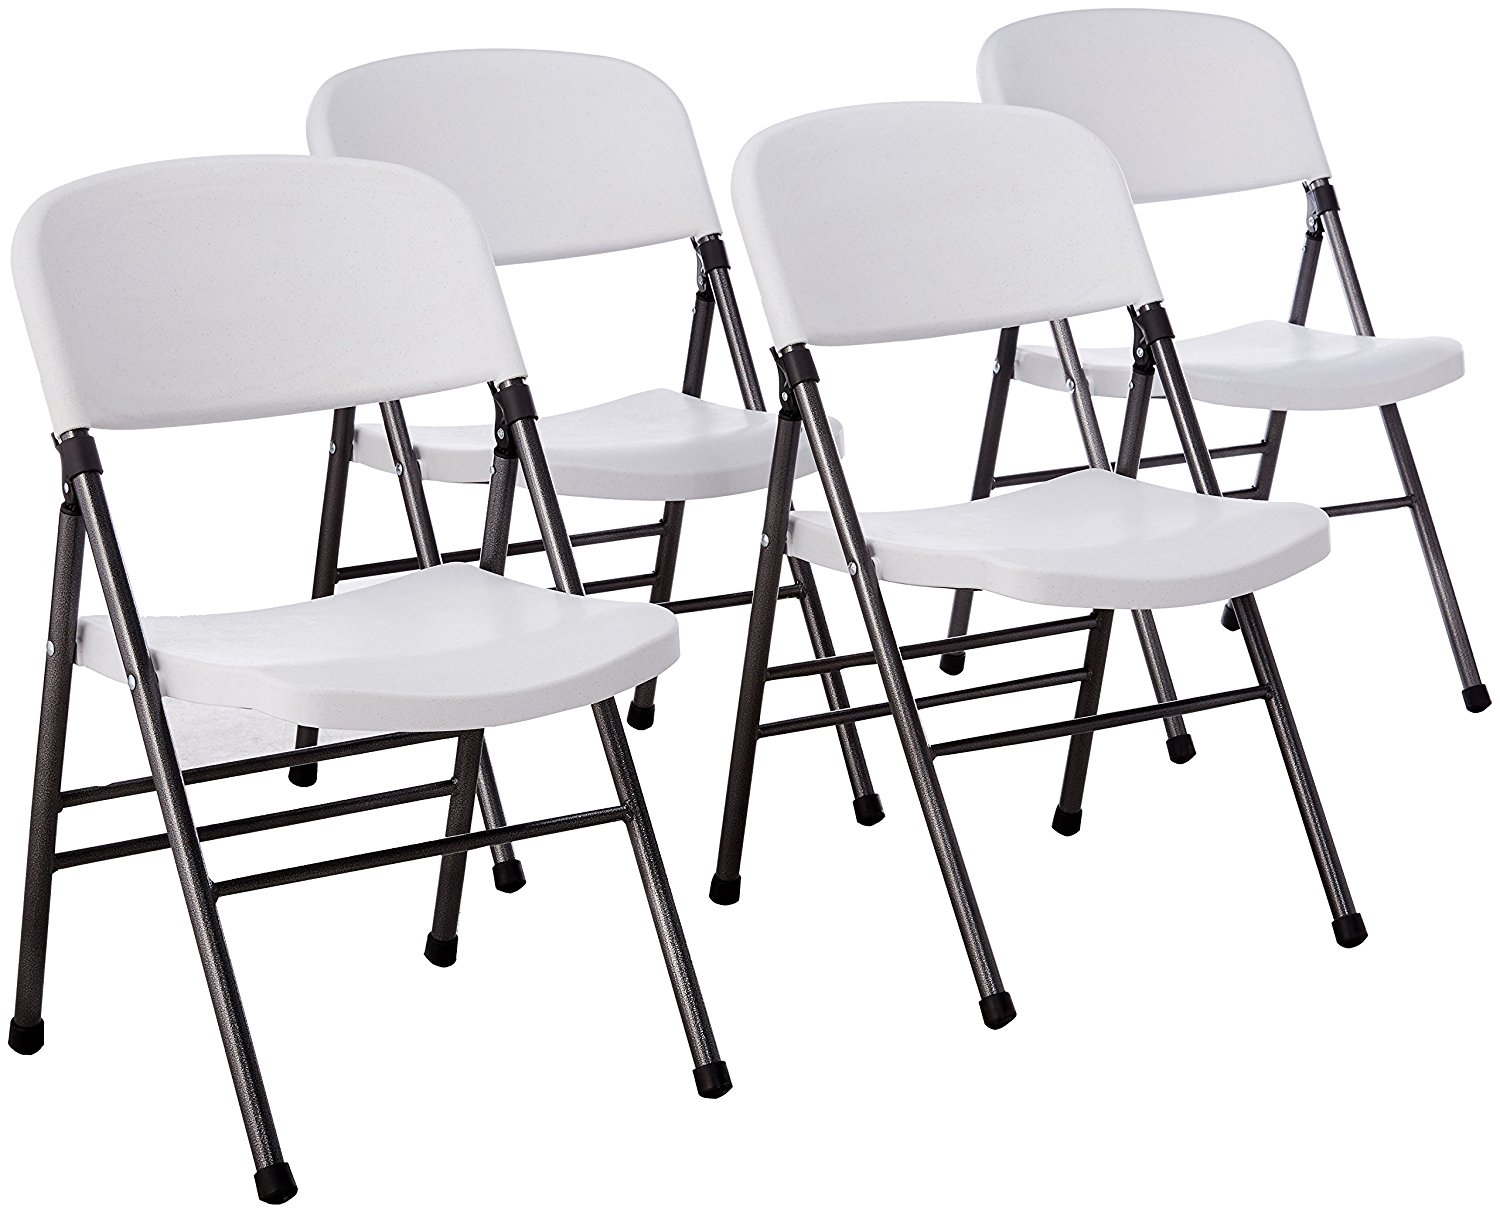 Cosco Resin Folding Chair with Molded Seat and Back White Speckle (4-pack)